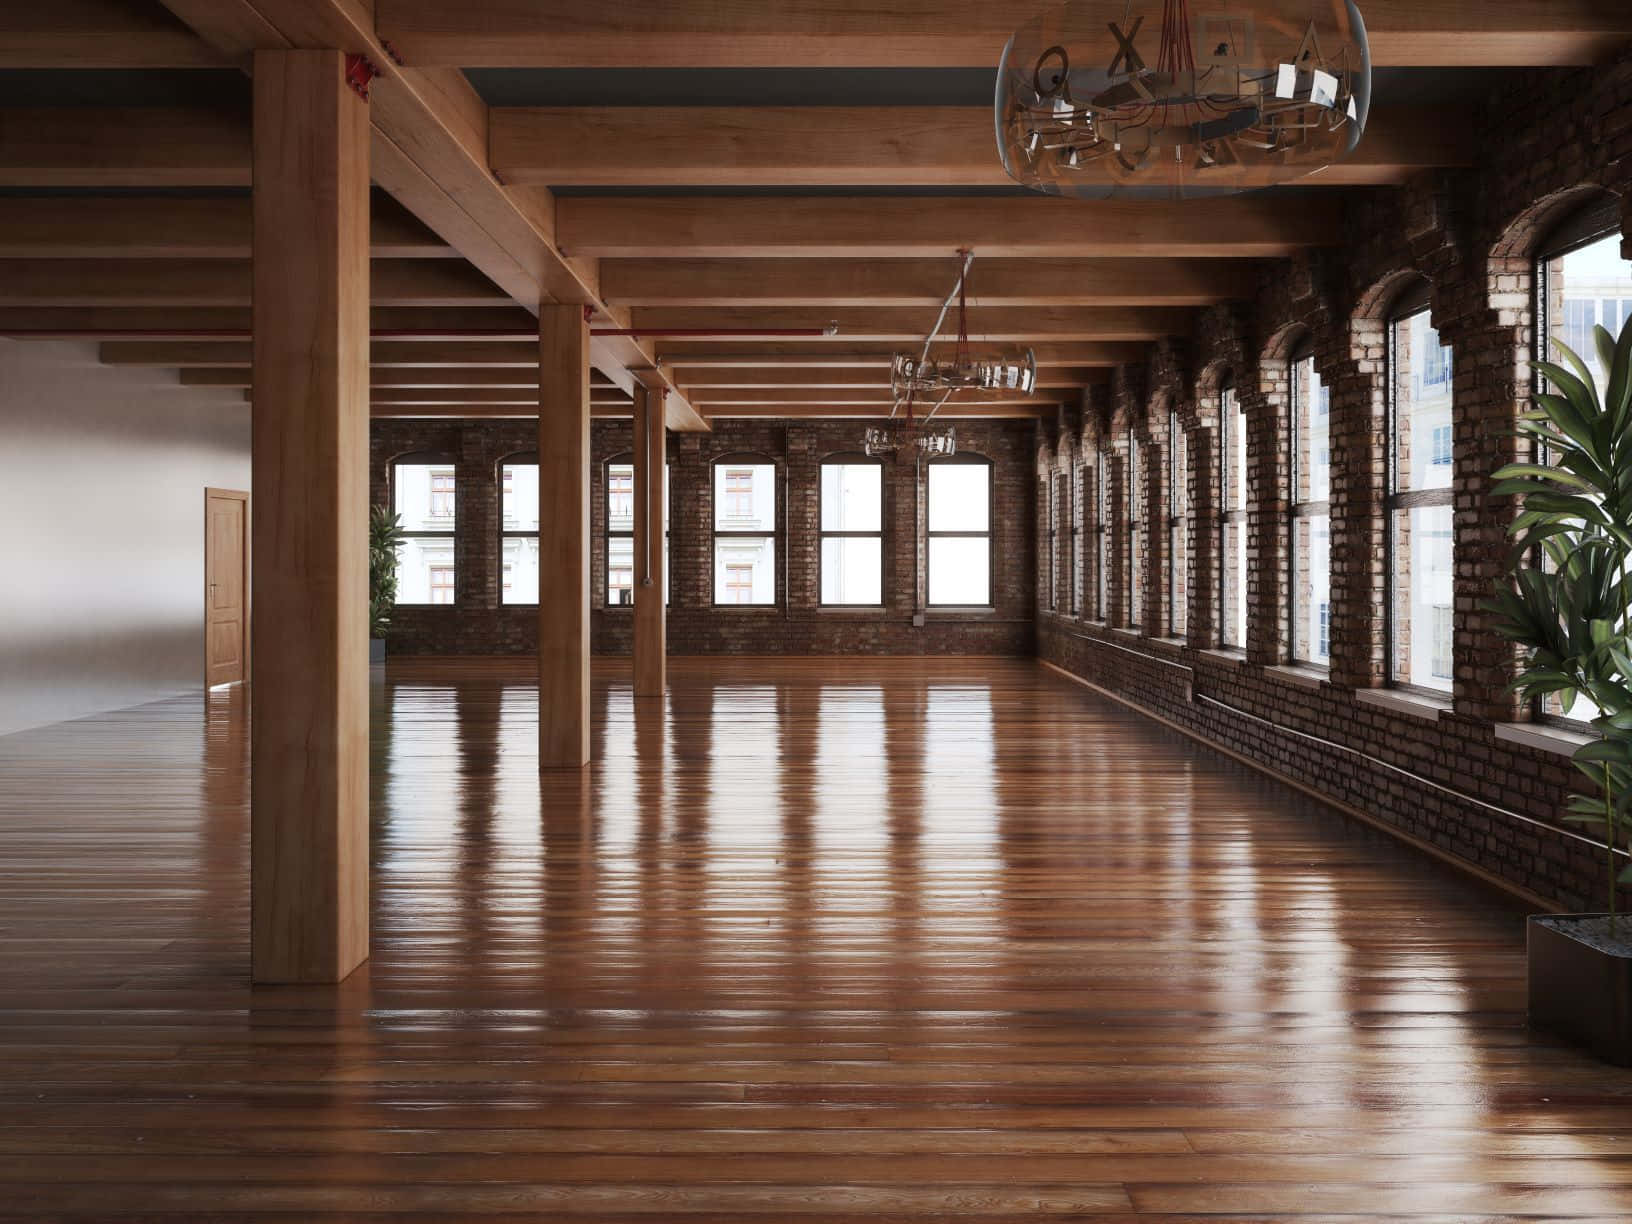 An Empty Room With Wooden Floors And Windows